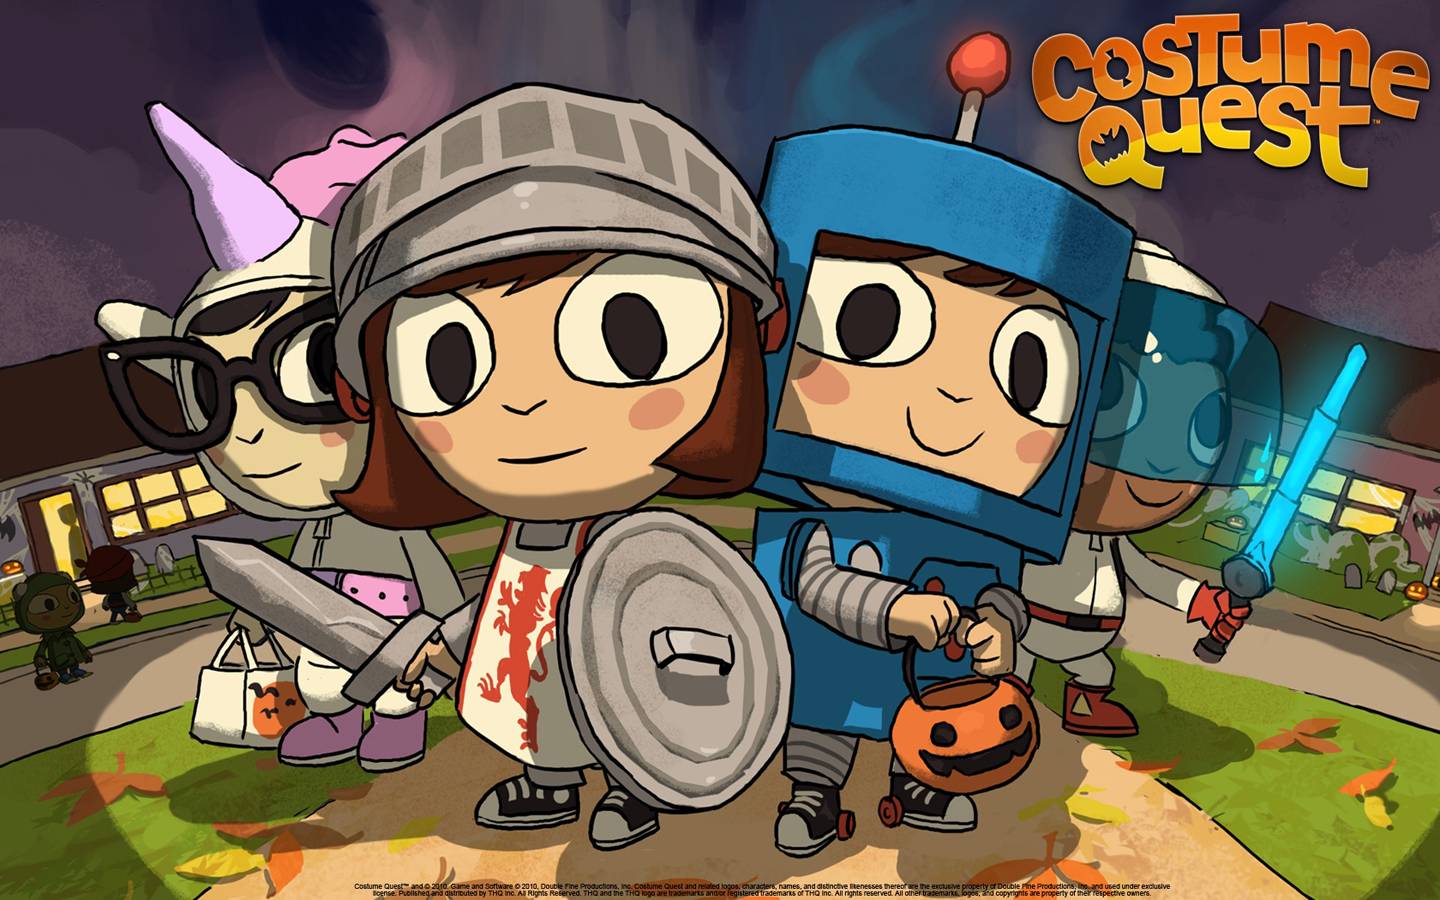 Costume Quest  (Steam Gift / ROW / Region Free) HB link